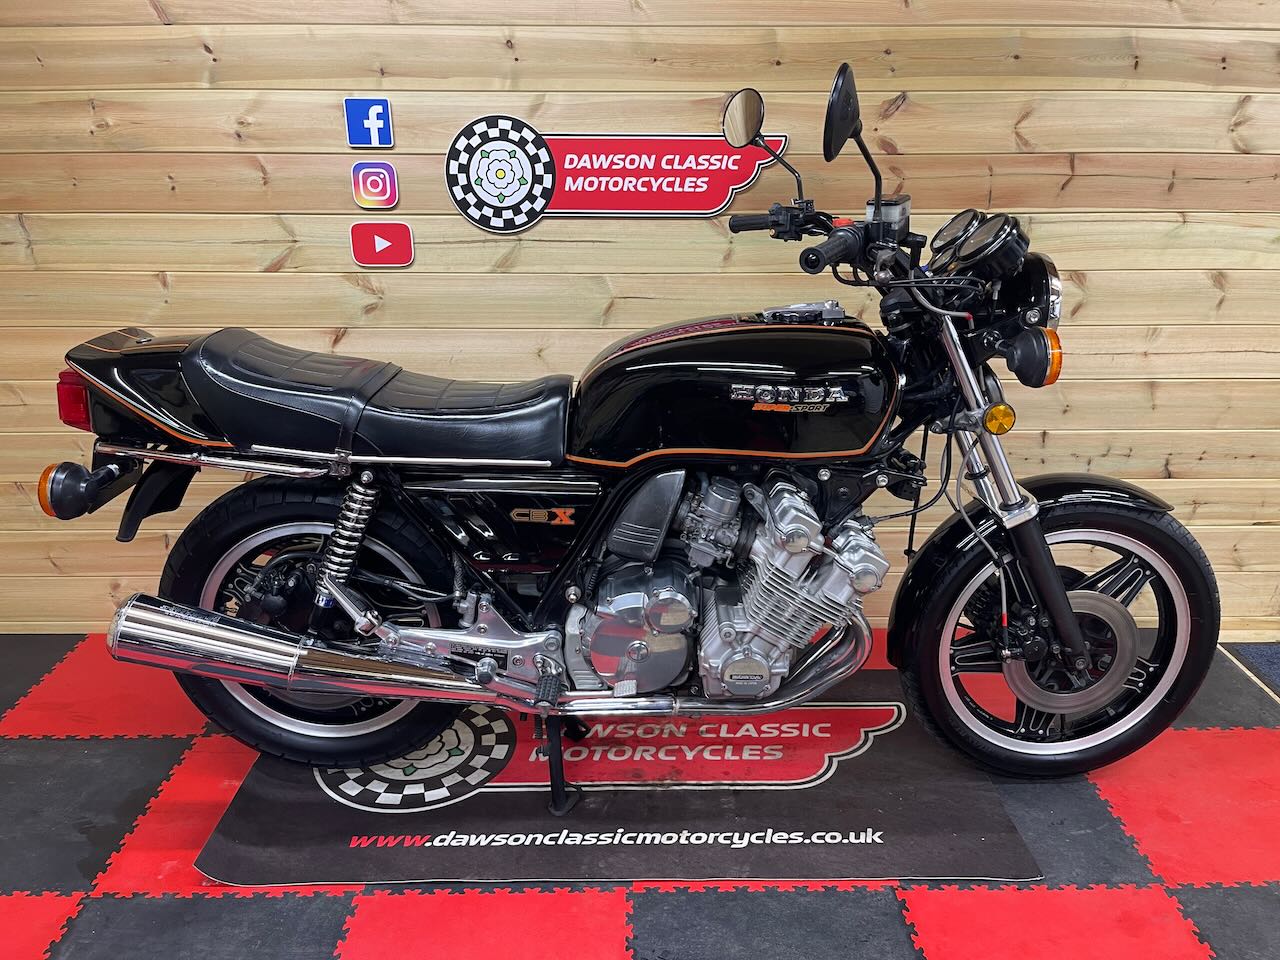 Honda CBX Motorcycles for sale